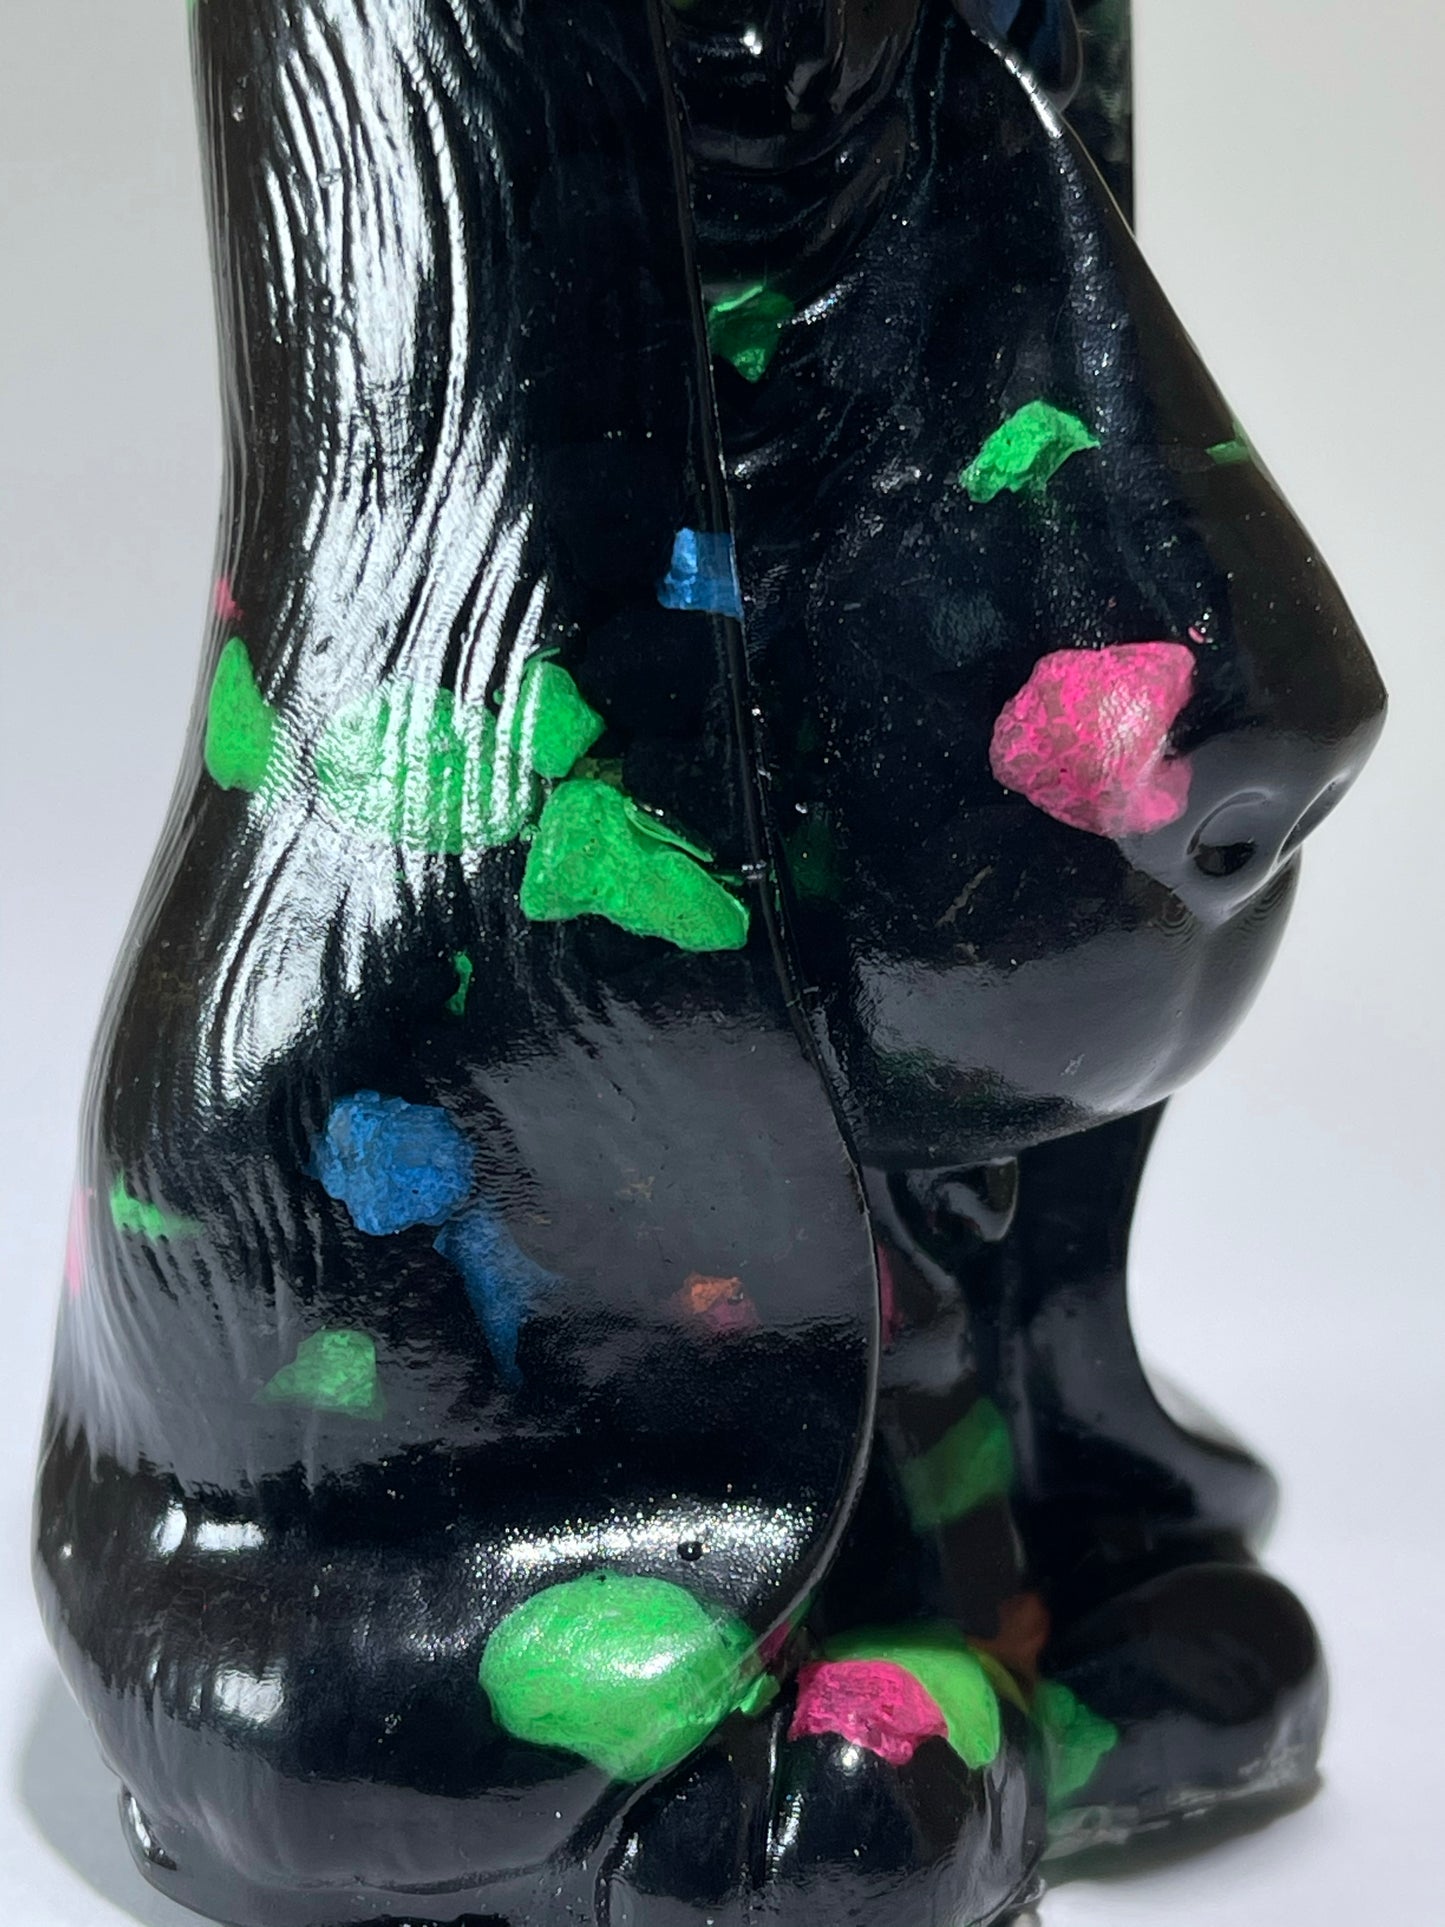 Cyclops Sad Dog: Resin Cast with Black and Neon Stones